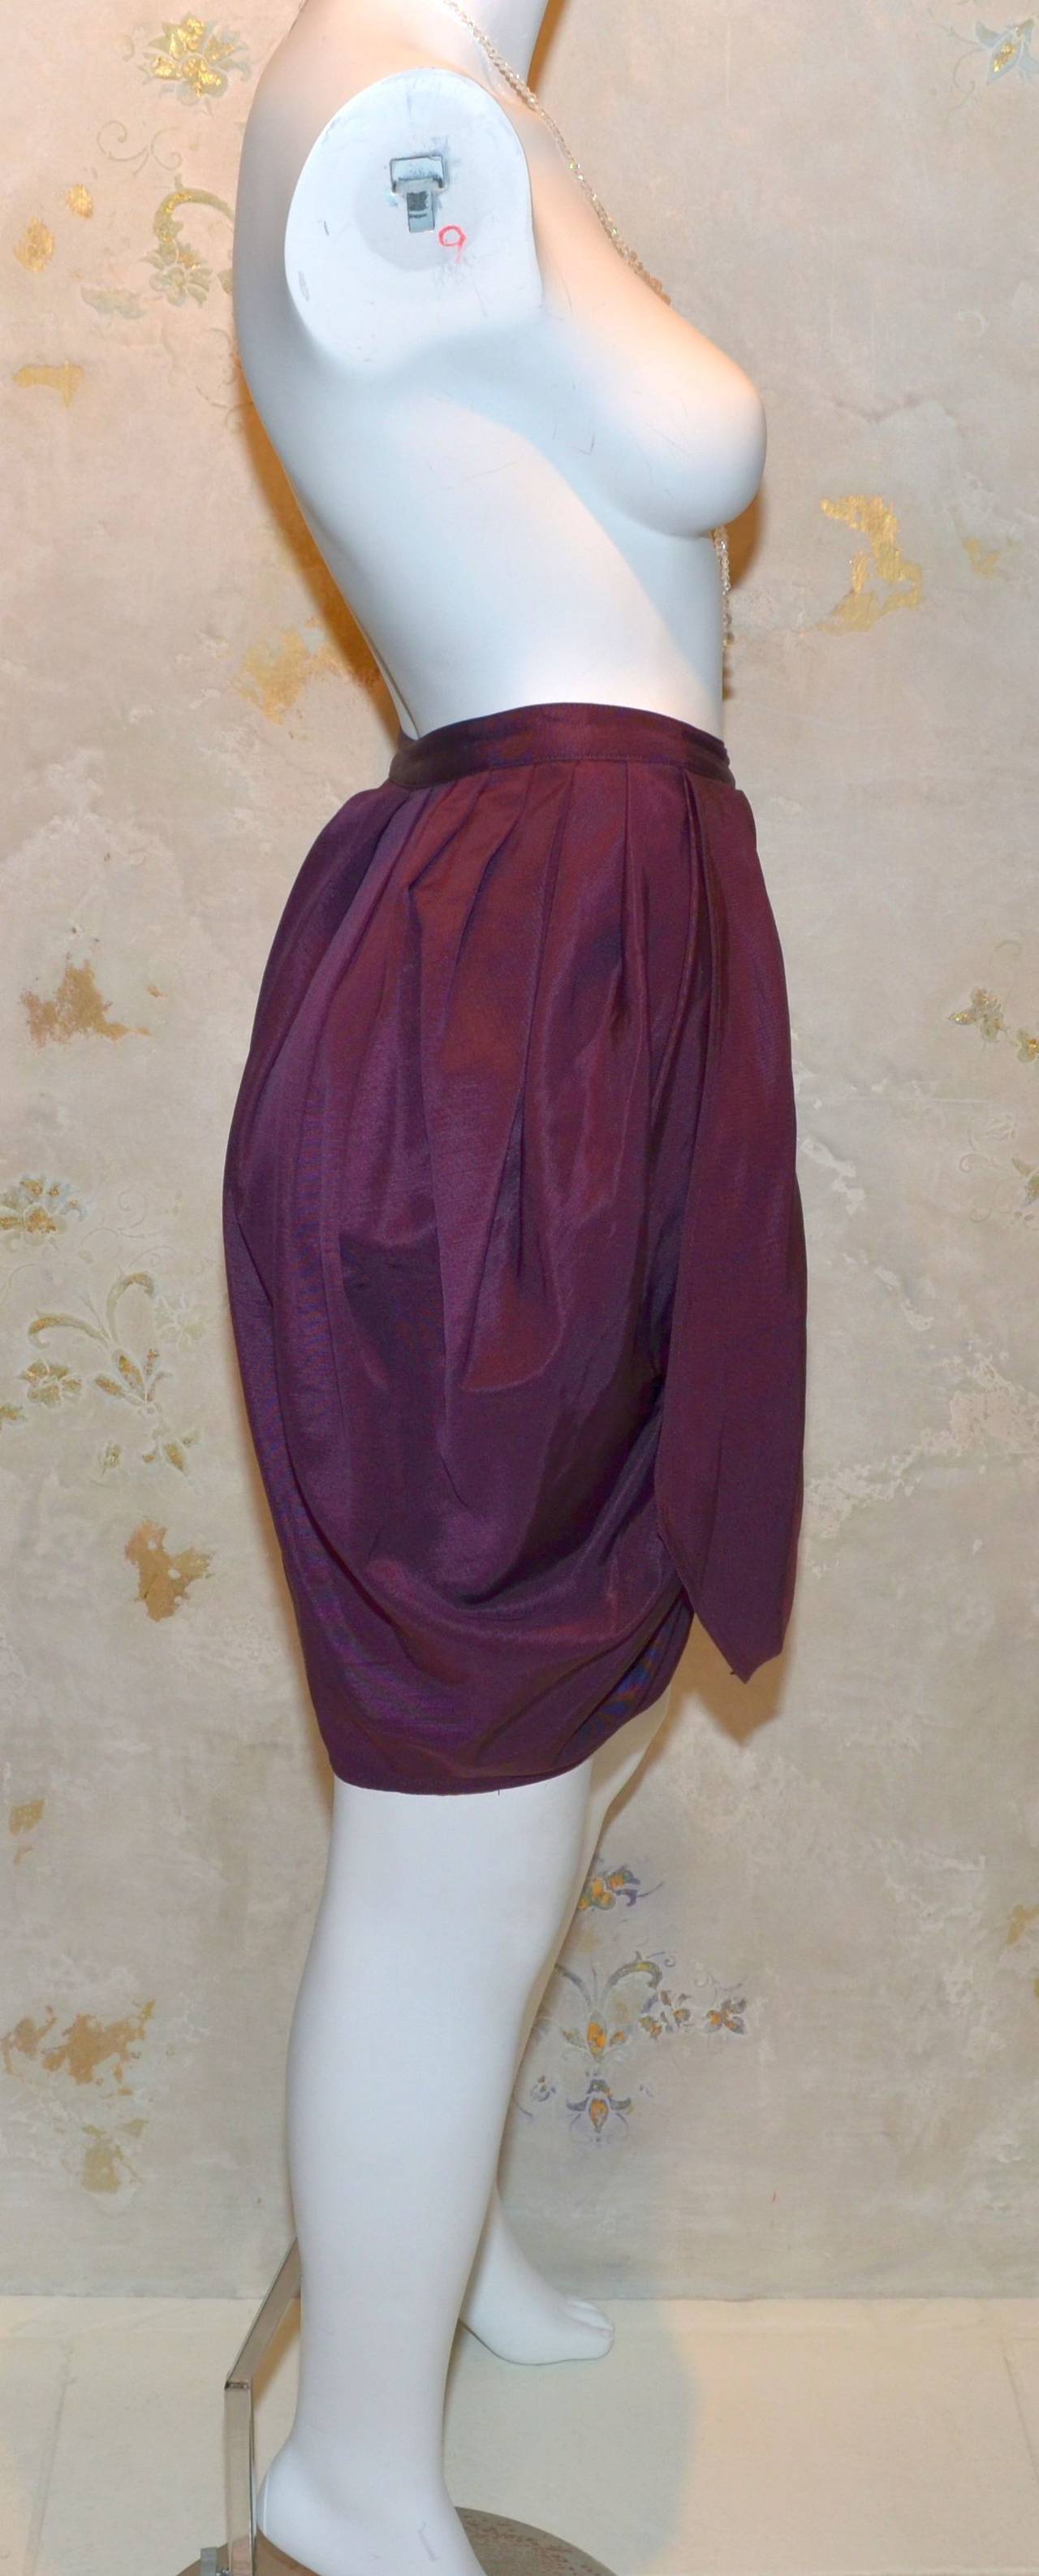 Vintage 1980s Gianni Versace Maroon Purple Wool Silk Blend Skirt with culotte shorts AKA skort. Side button closure and a zipper fastening at the front center, pleated detail along the front and back. Small hole on the front layer as pictured. Made